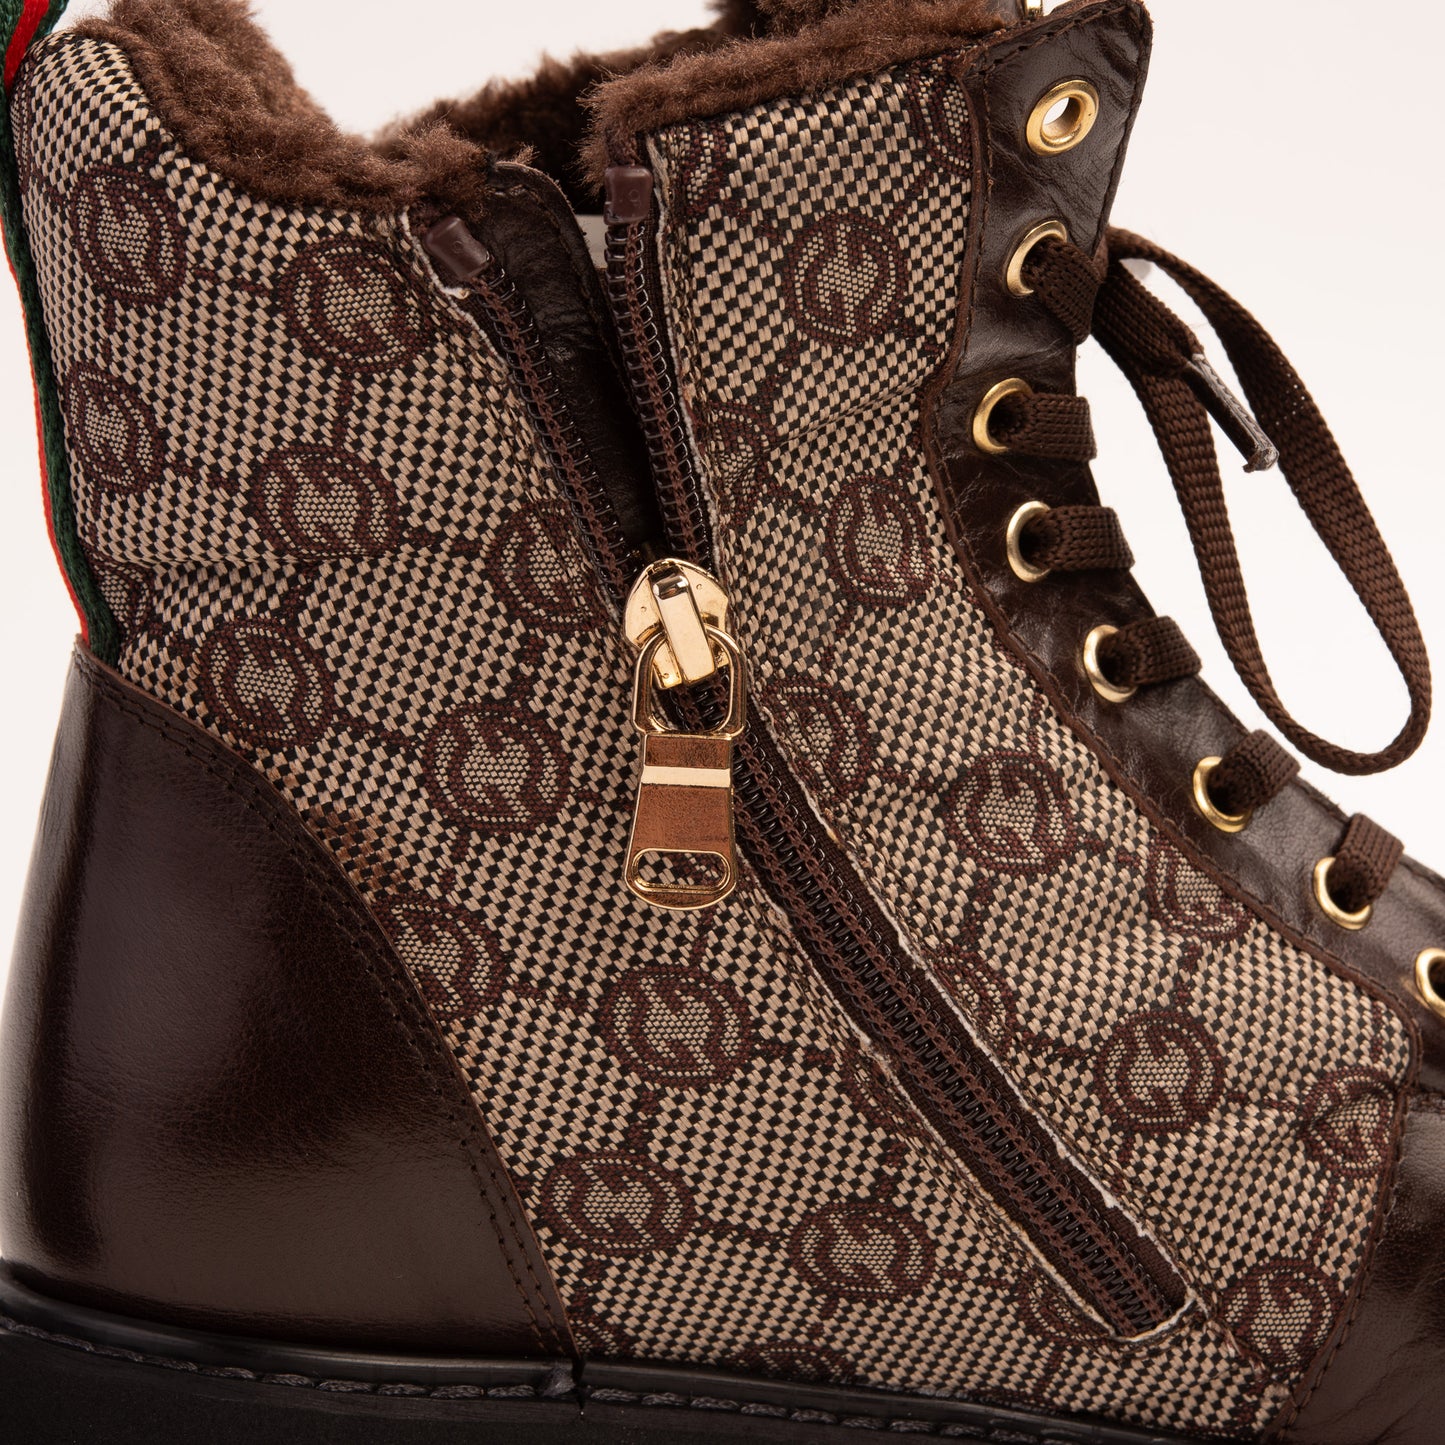 The Boston Leather Lace-Up Ankle Women Brown Boot With a Side Zipper